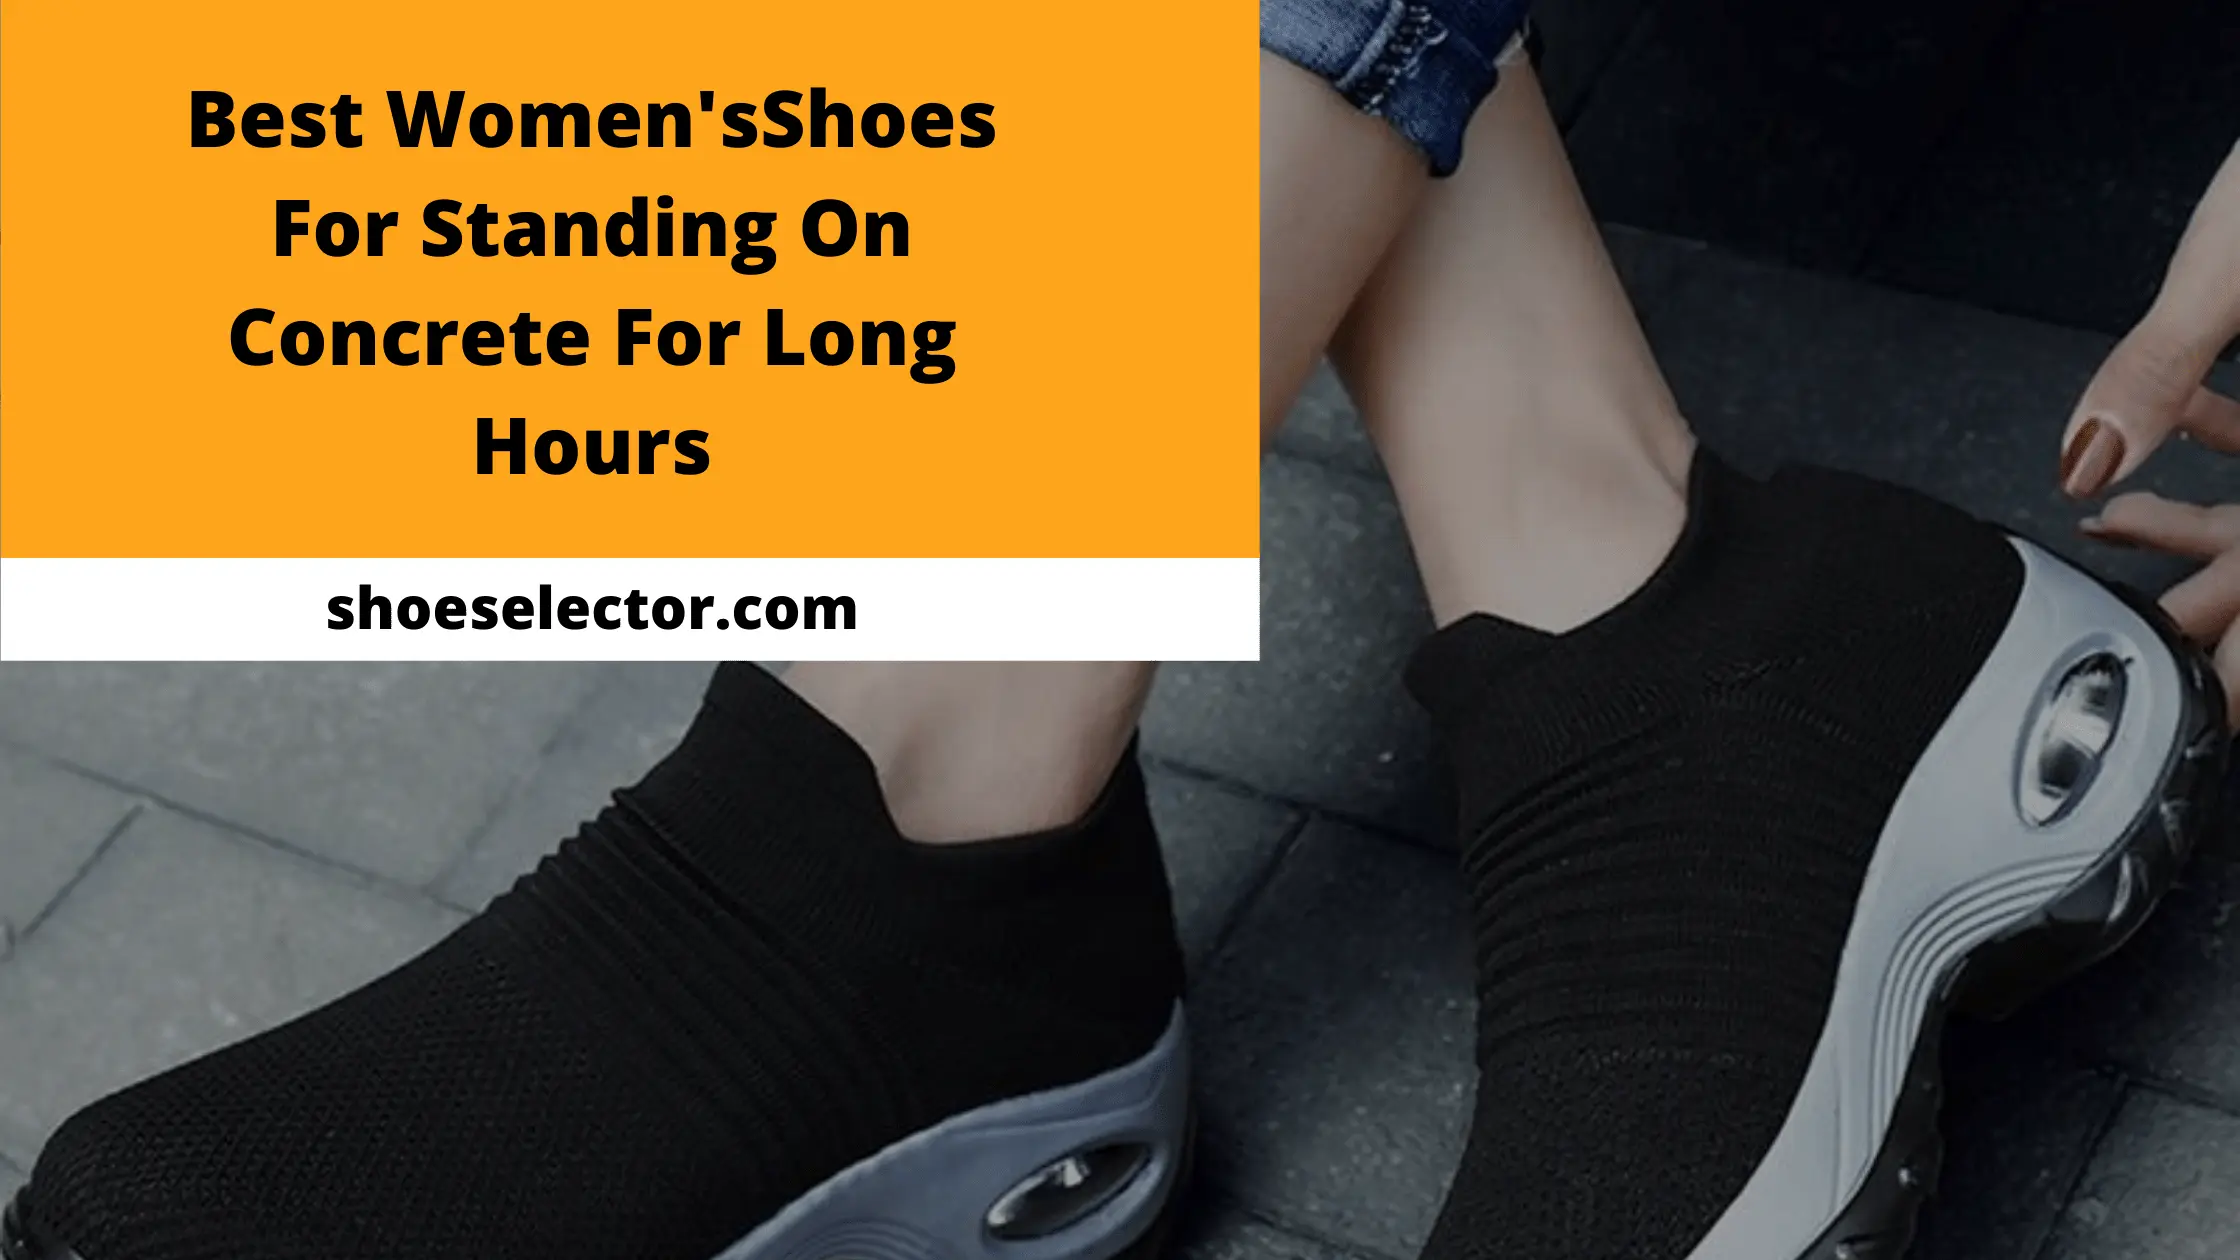 Best Women's Shoes For Standing On Concrete For Long Hours [REVEALED Top Picks in 2022]